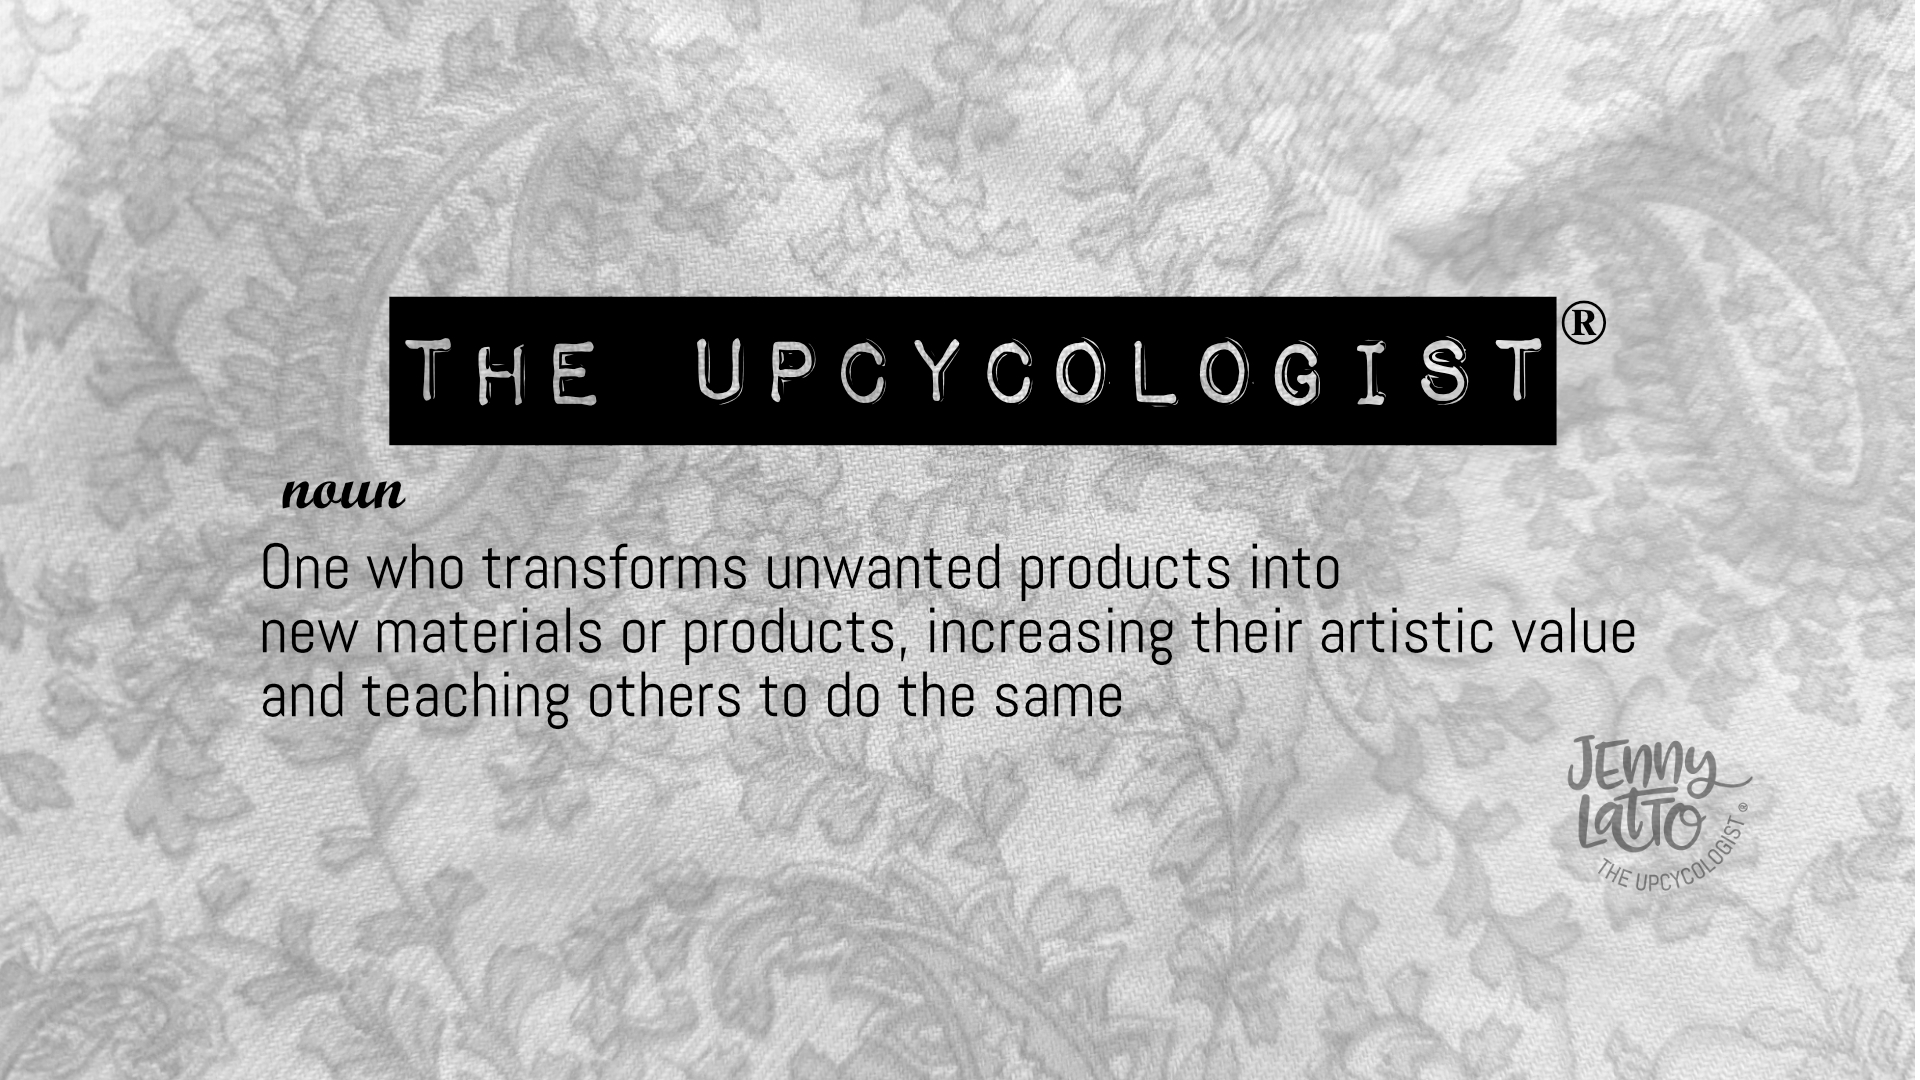 The Upcycologist